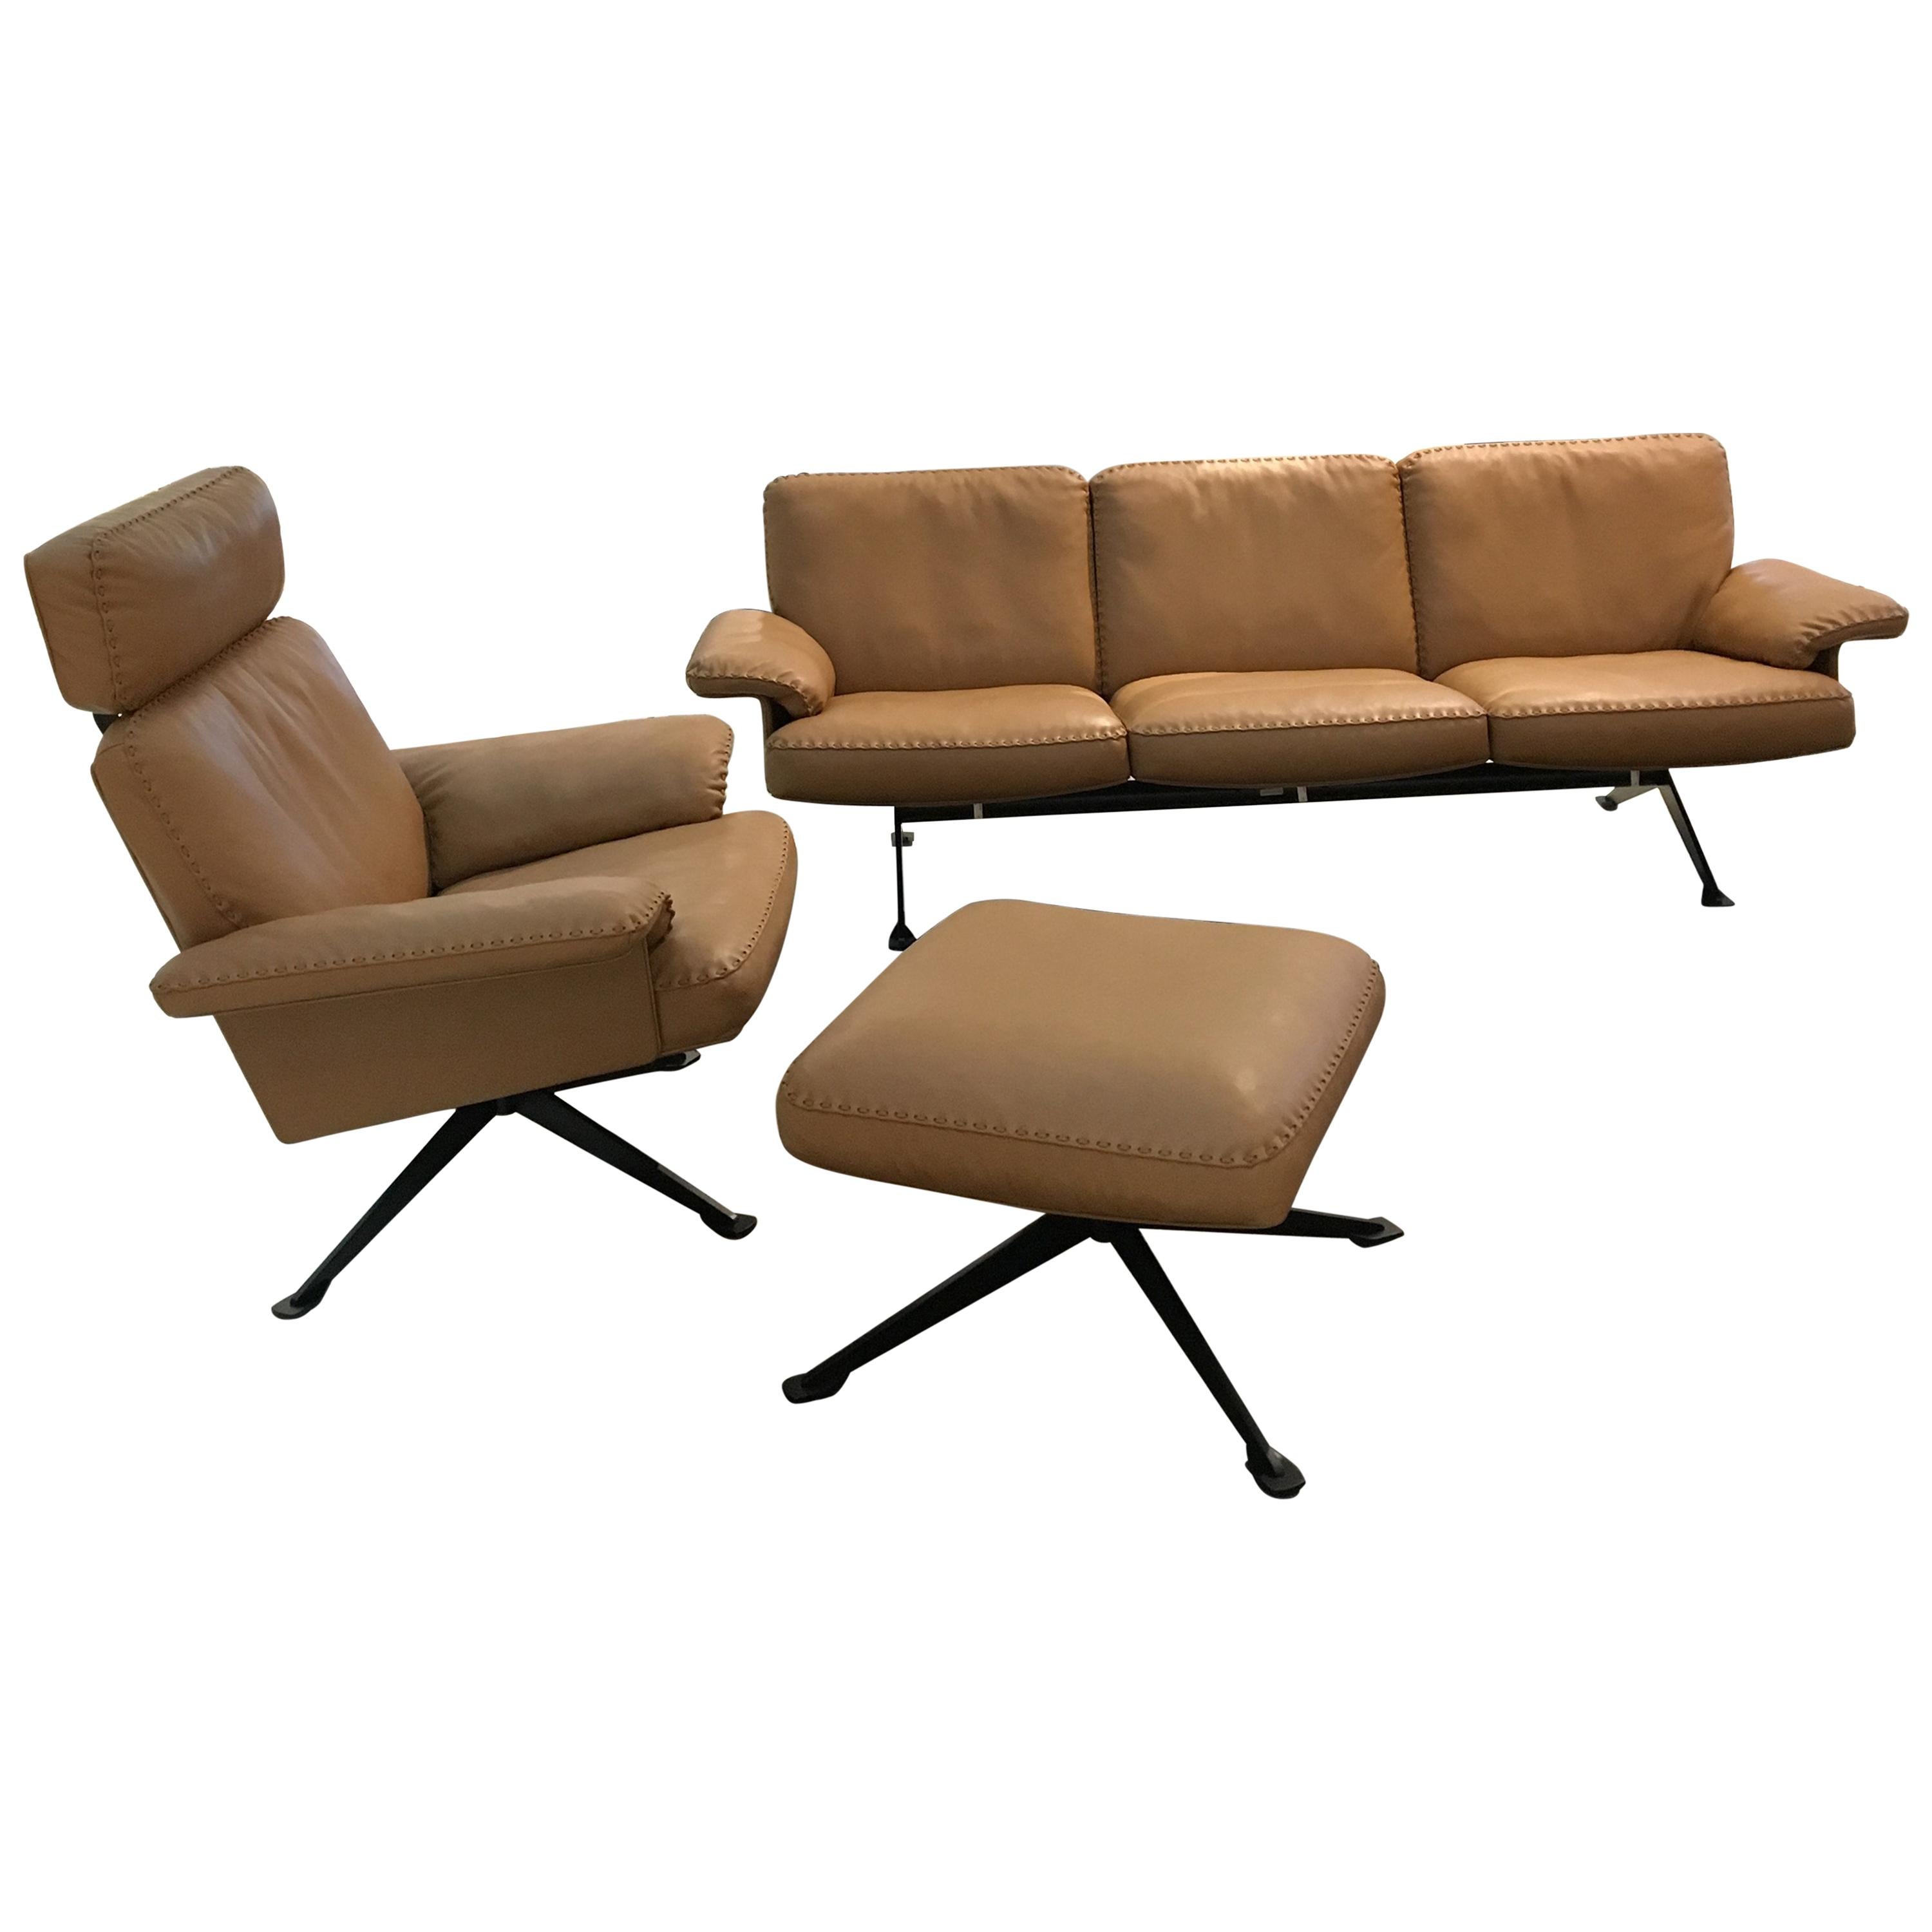 DS-31 Leather Sofa, Swivelling Armchair and Ottoman Set by De Sede